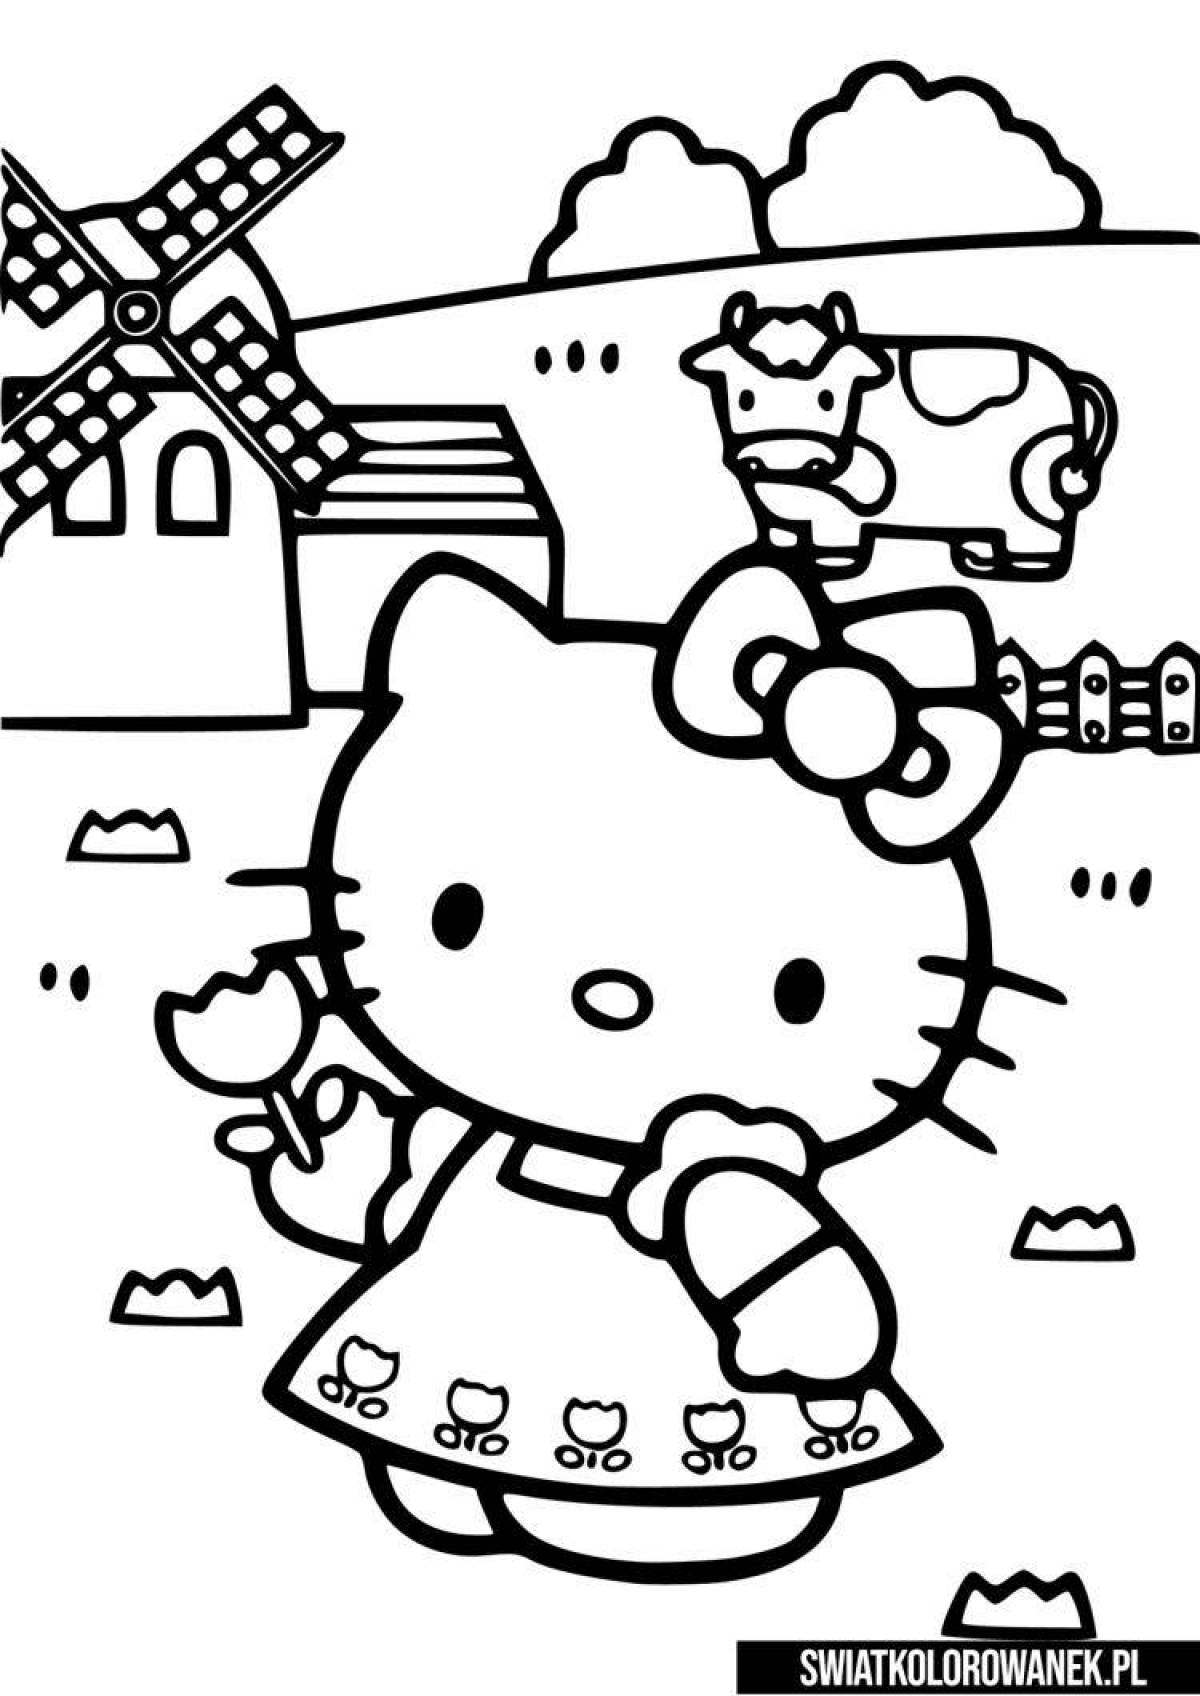 Amazing hello kitty anime coloring book